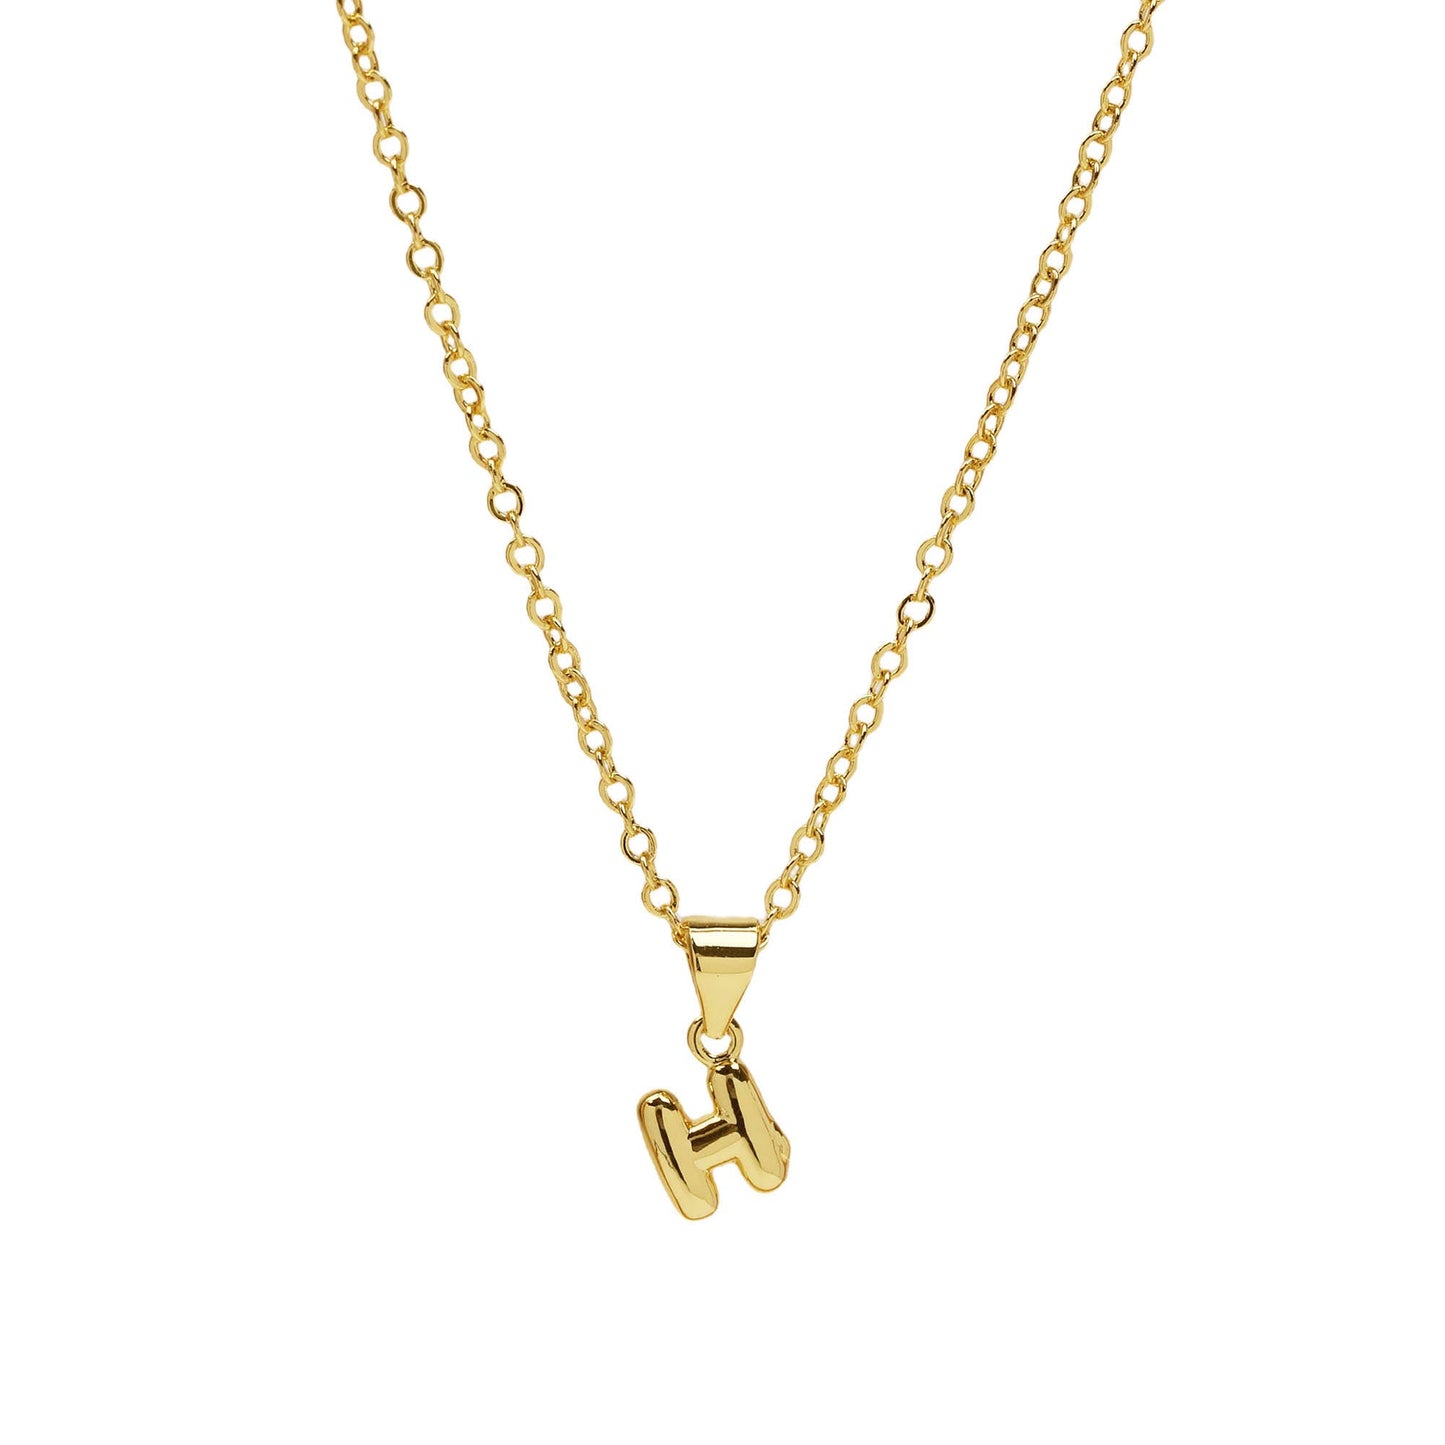 Initial Mini Balloon Bubble 18K Gold Necklace: A